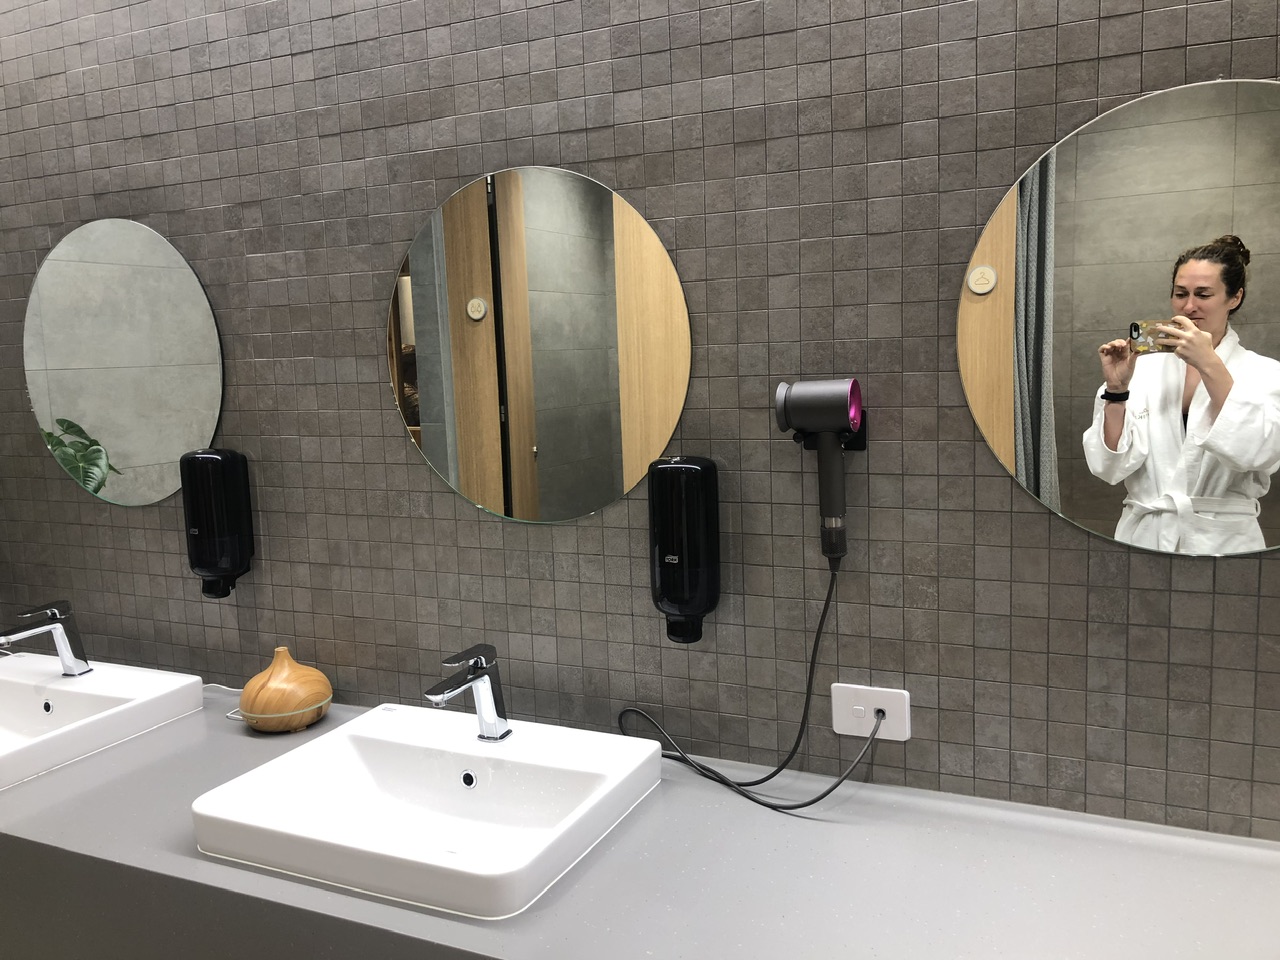 Young woman in white bathrobe takes a selfie in changing rooms at at Ōpuke Thermal Pools and Day Spa. A dyson hairdryer is on the grey tiled wall, there are also three mirrors, two soap dispensers and two sinks.